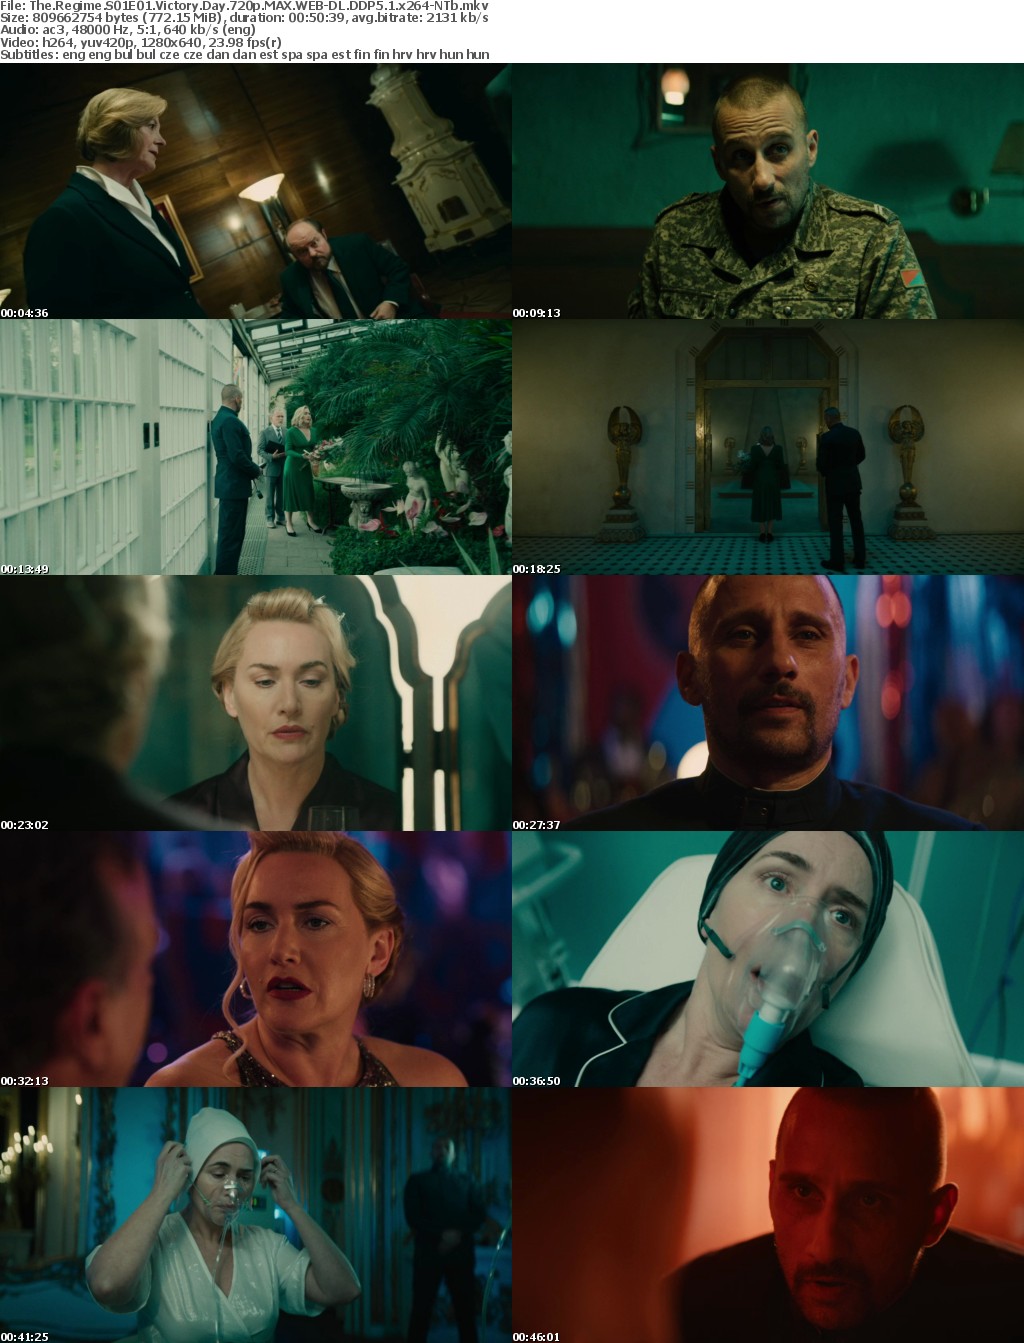 The Regime S01E01 Victory Day 720p MAX WEB-DL DDP5 1 x264-NTb